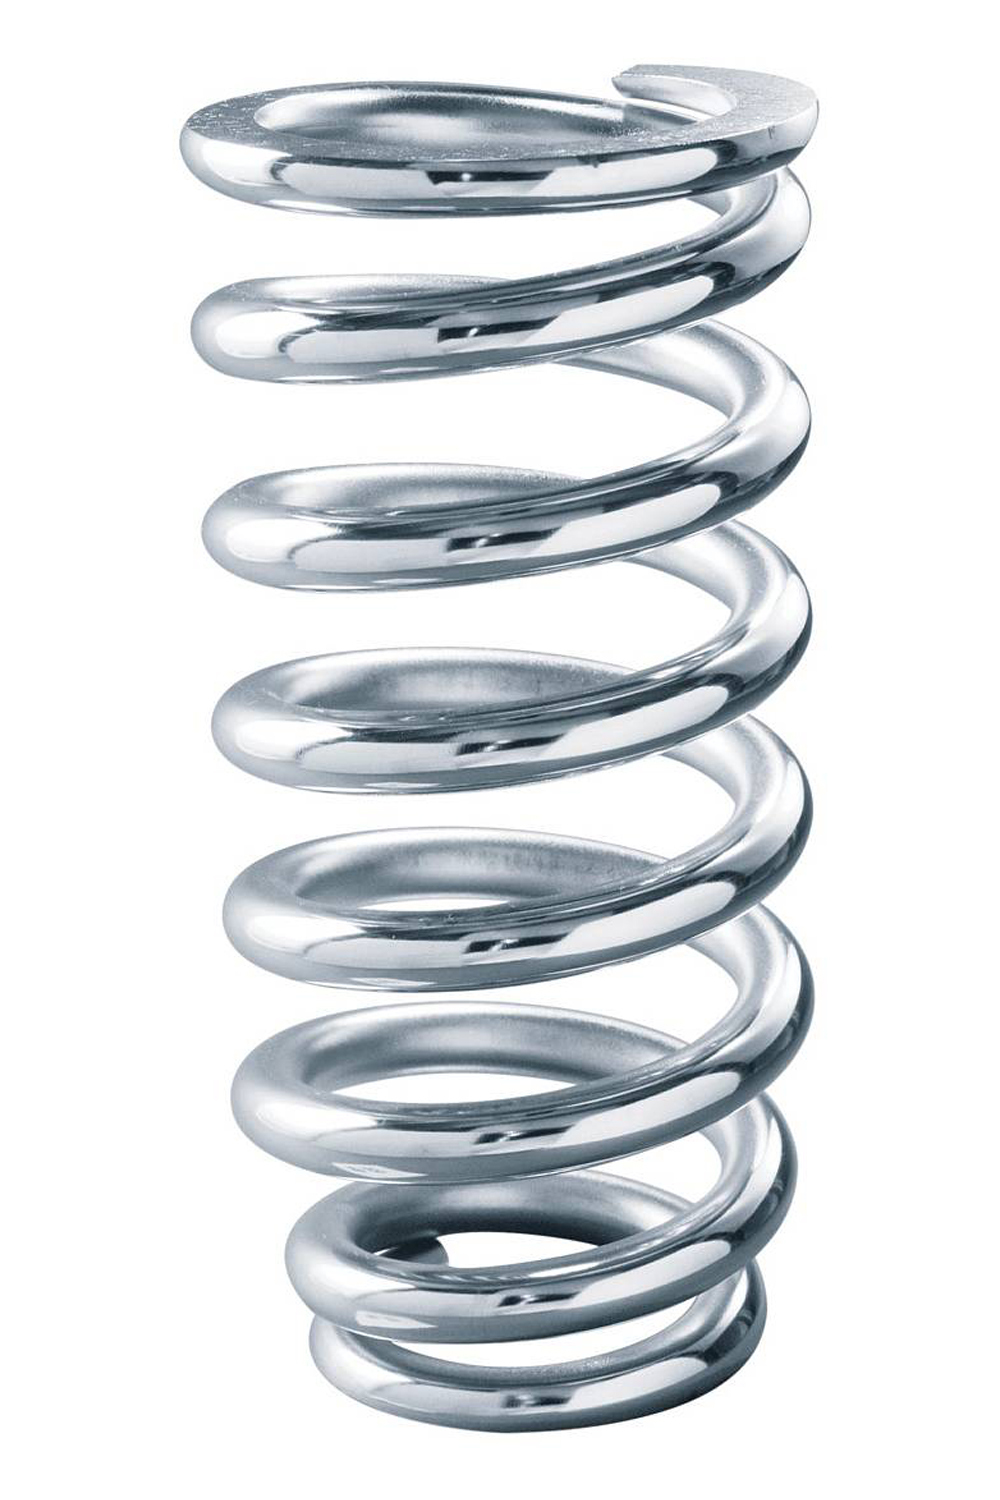 Mustang II Coil Spring - 2.5/3.5 x 8 500#